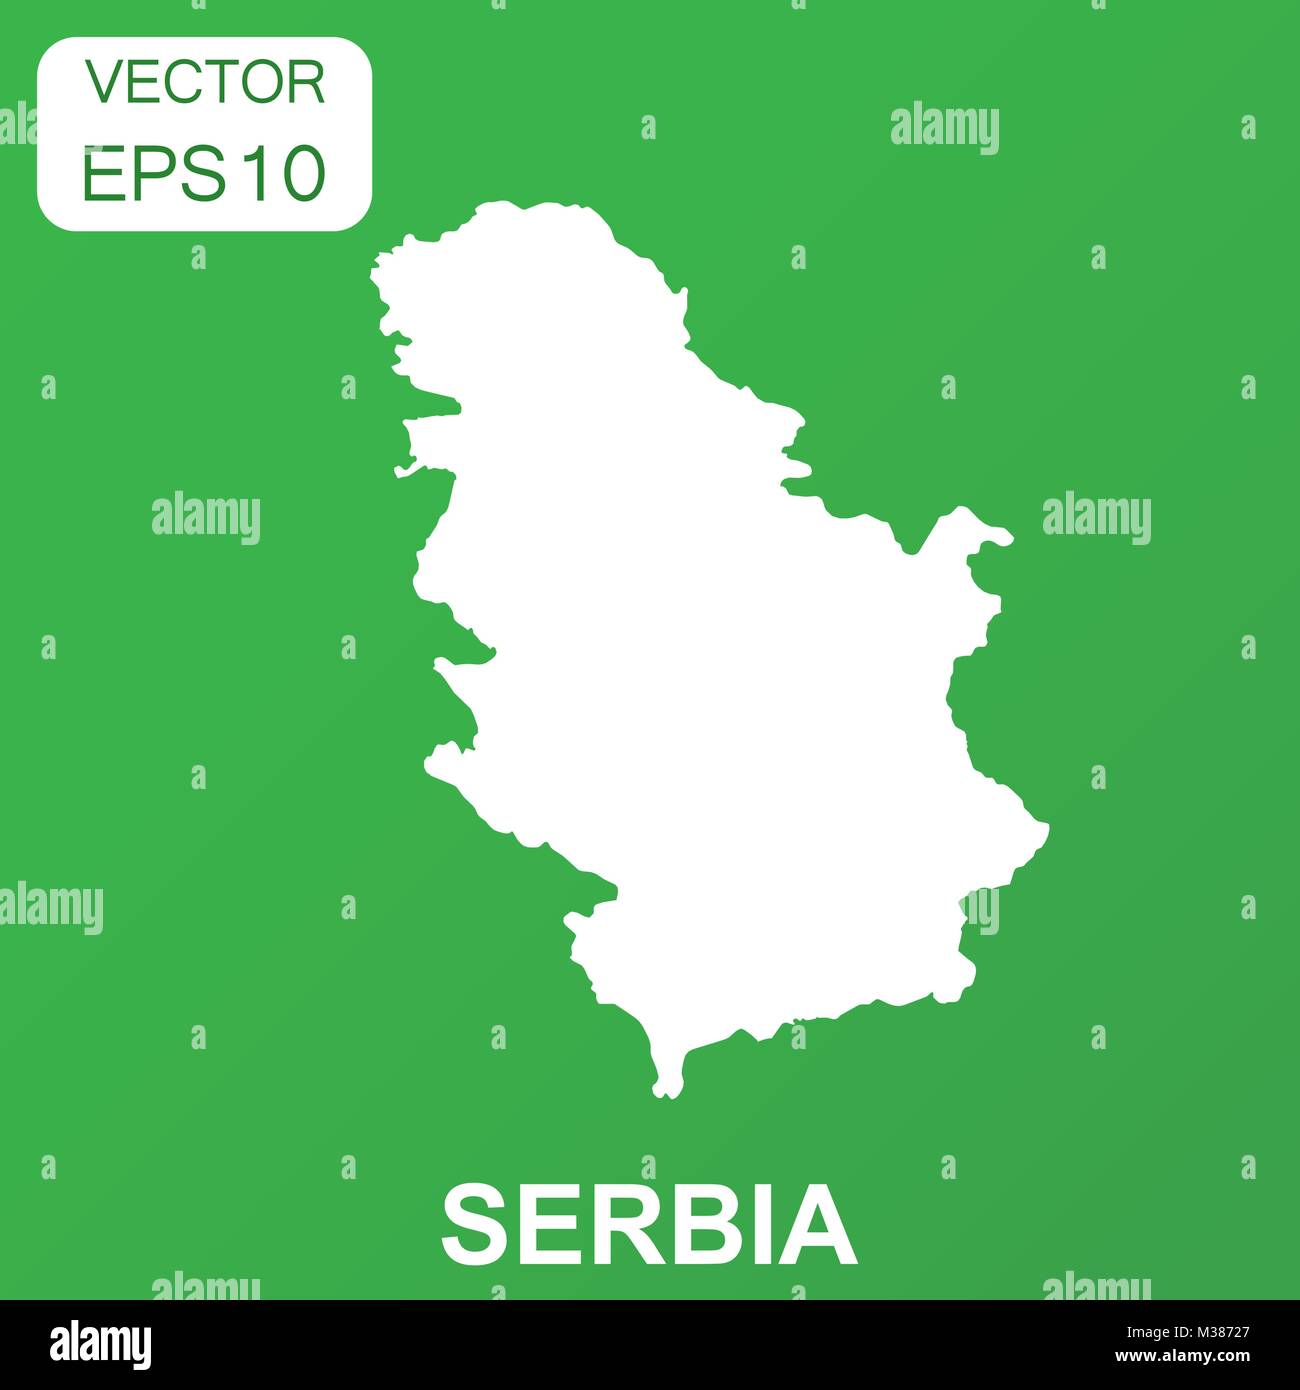 Serbia map icon. Business concept Serbia pictogram. Vector illustration on green background. Stock Vector